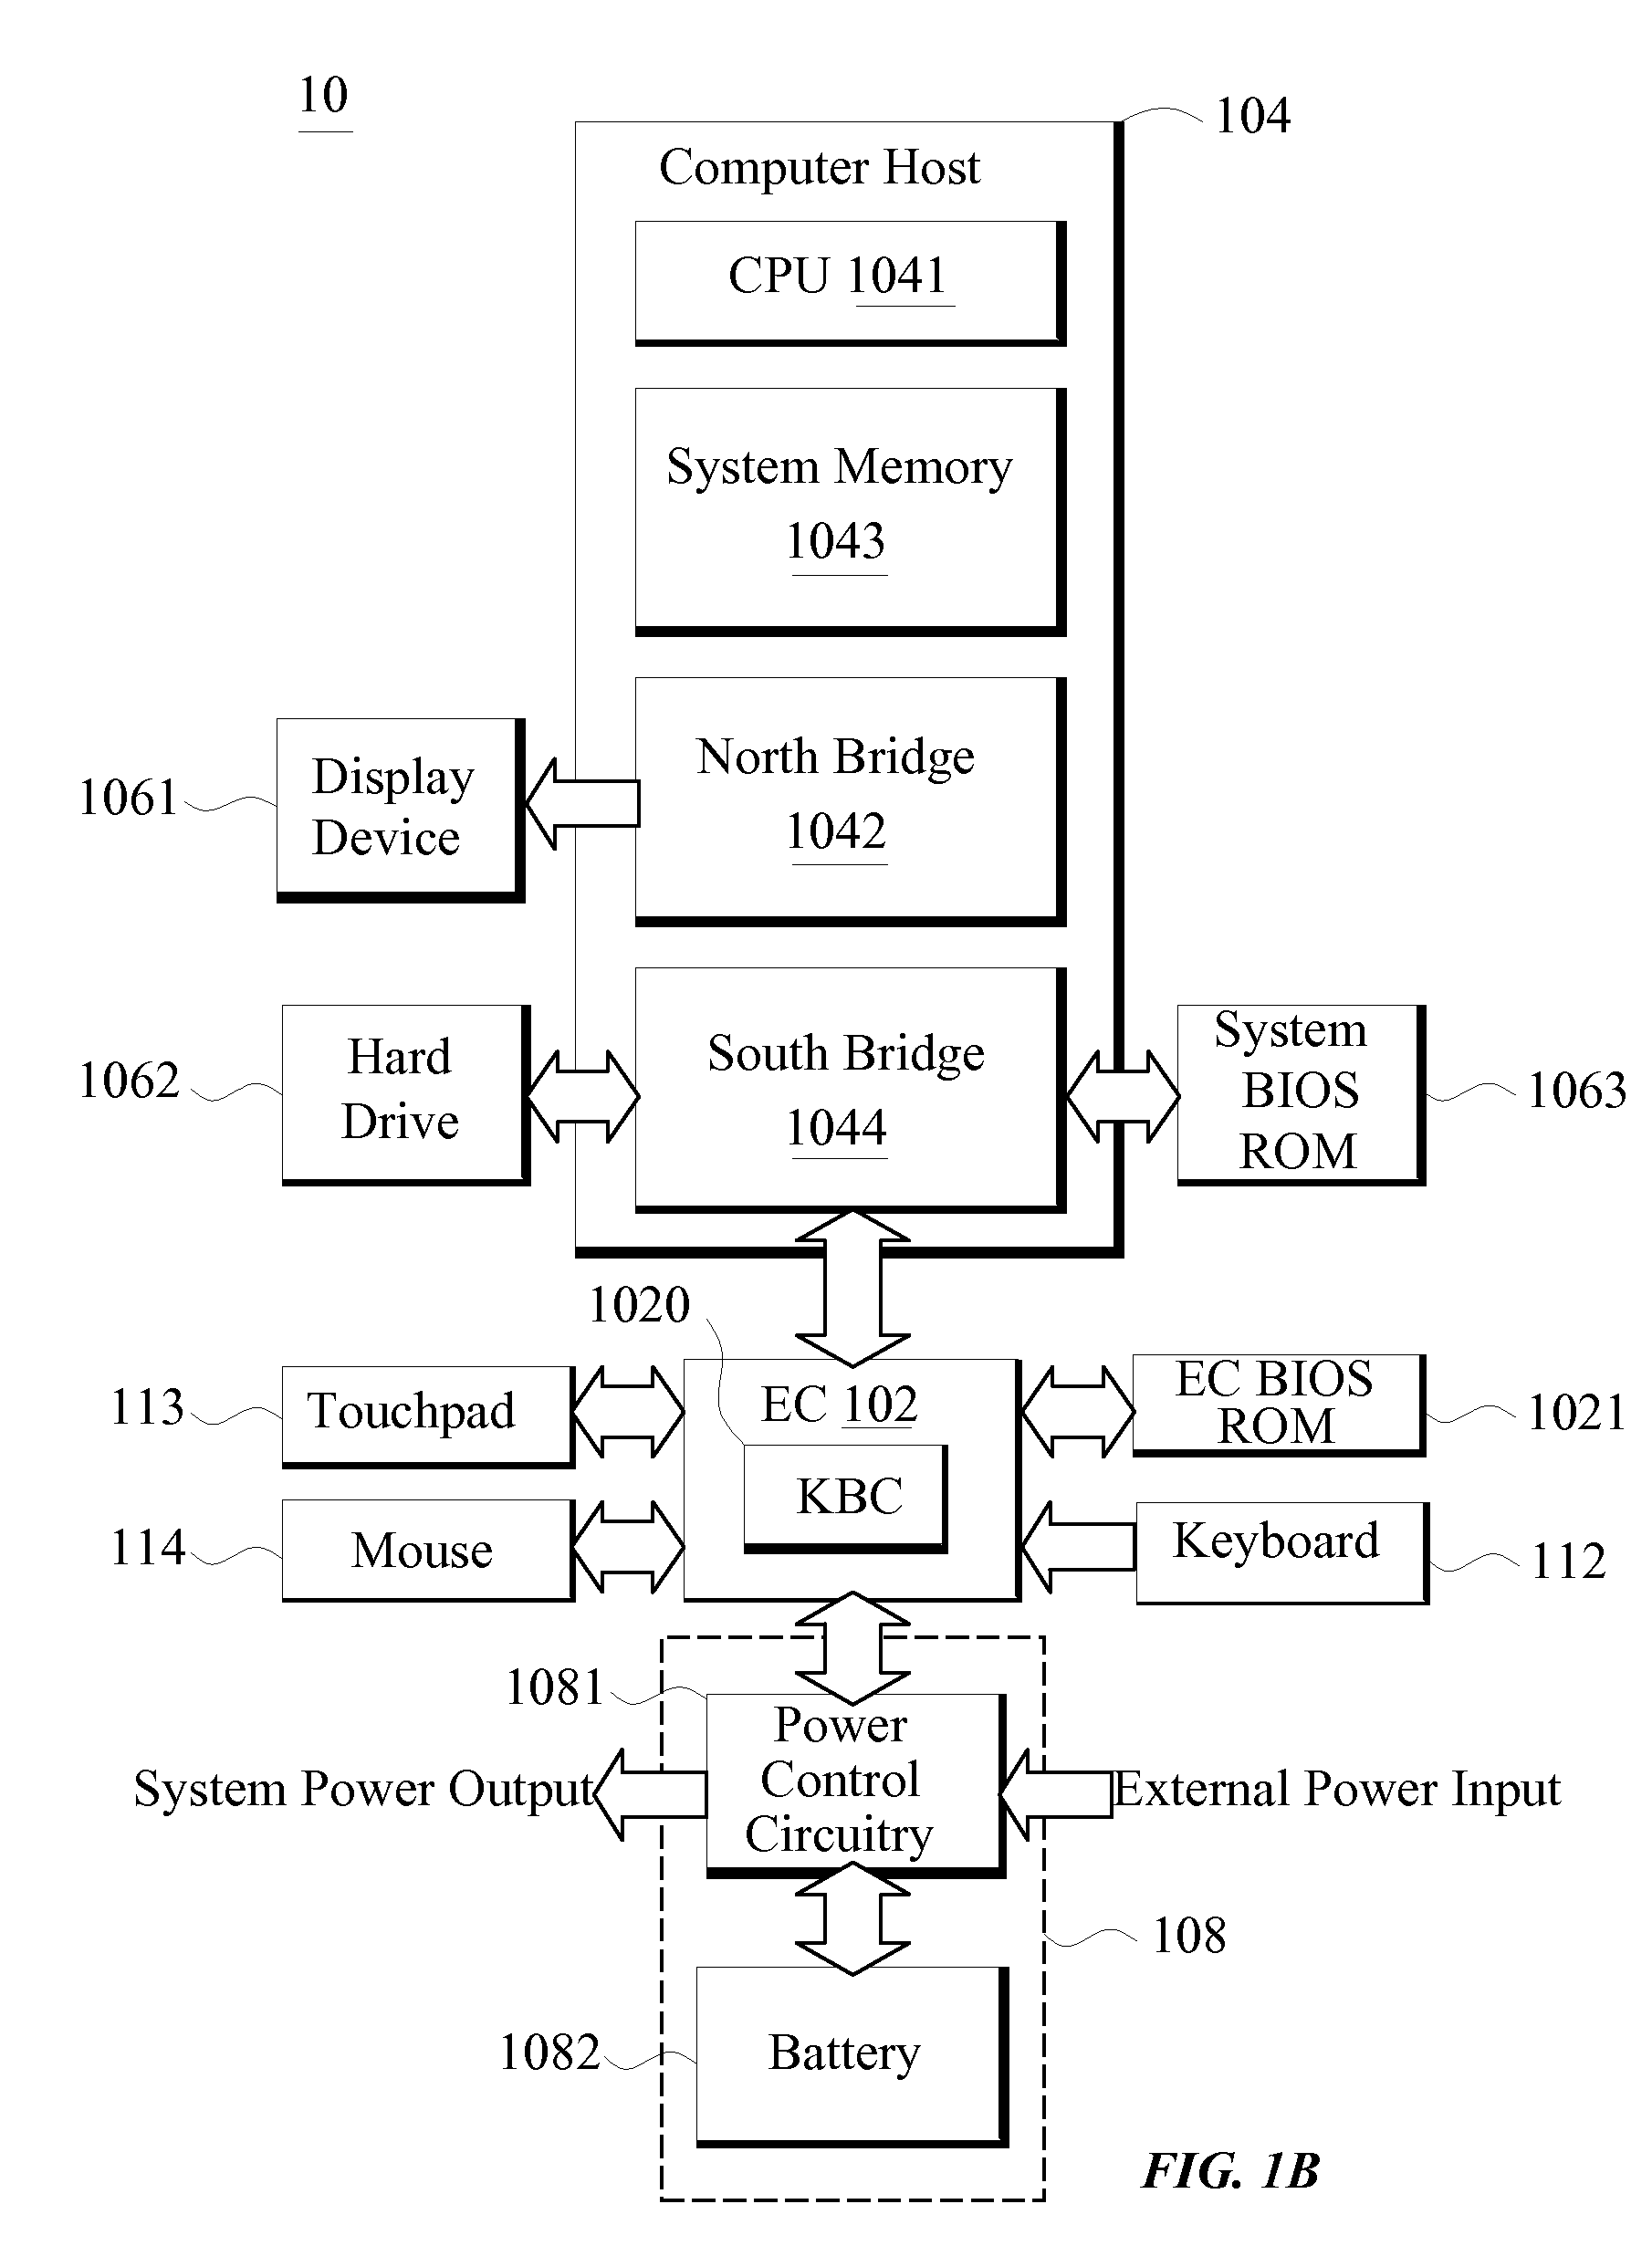 Portable computer and security operating method thereof